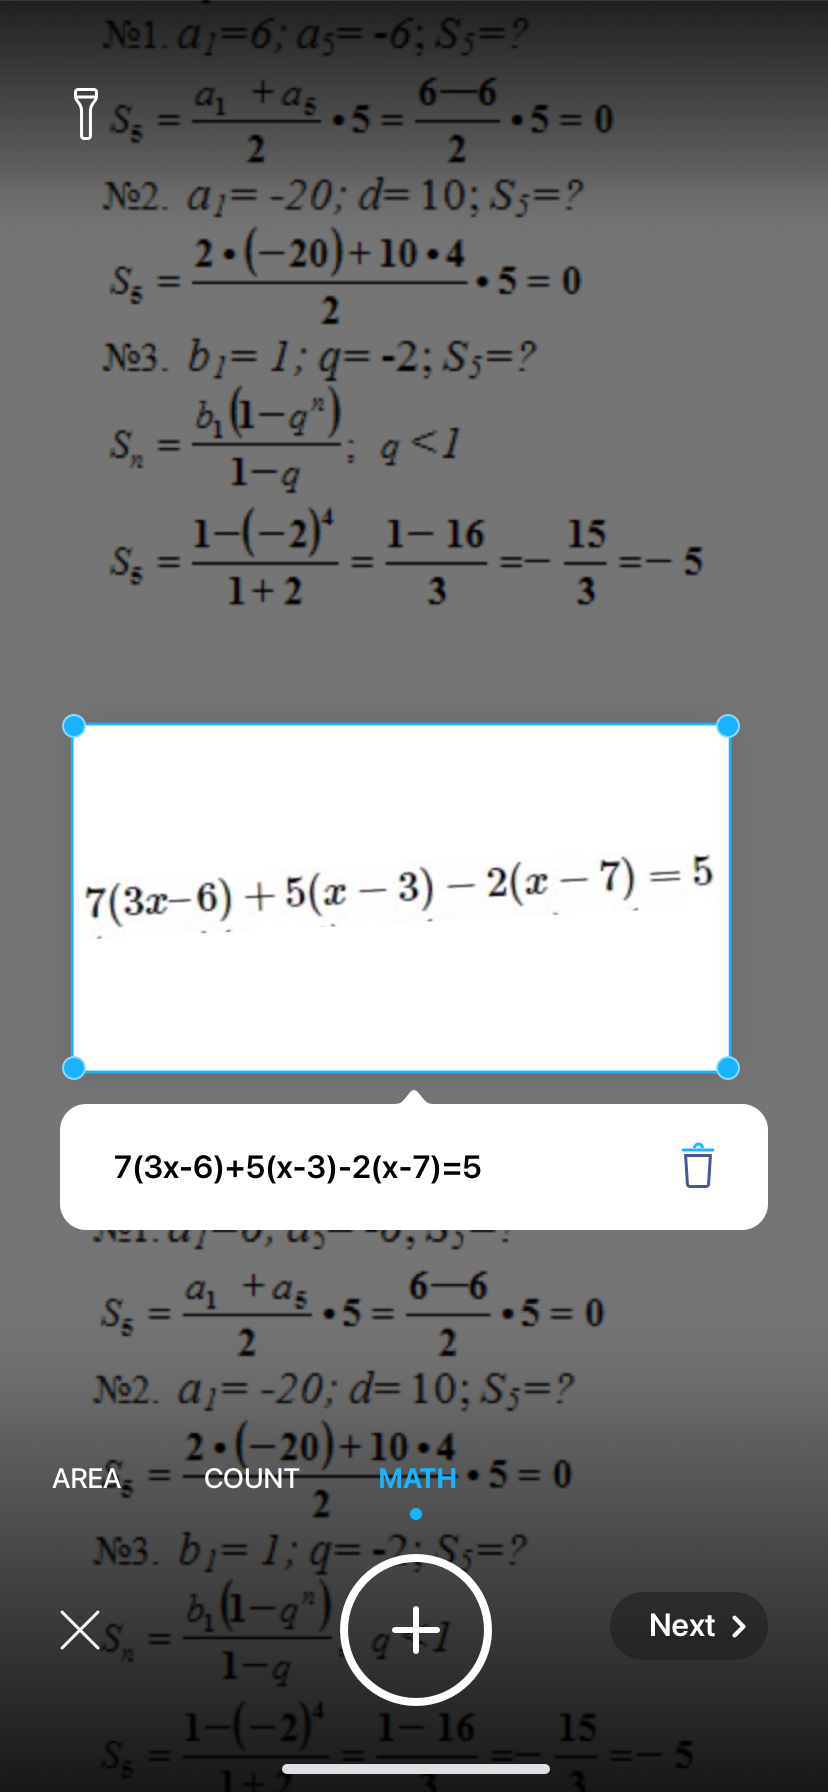 How to solve math problems with iScanner?